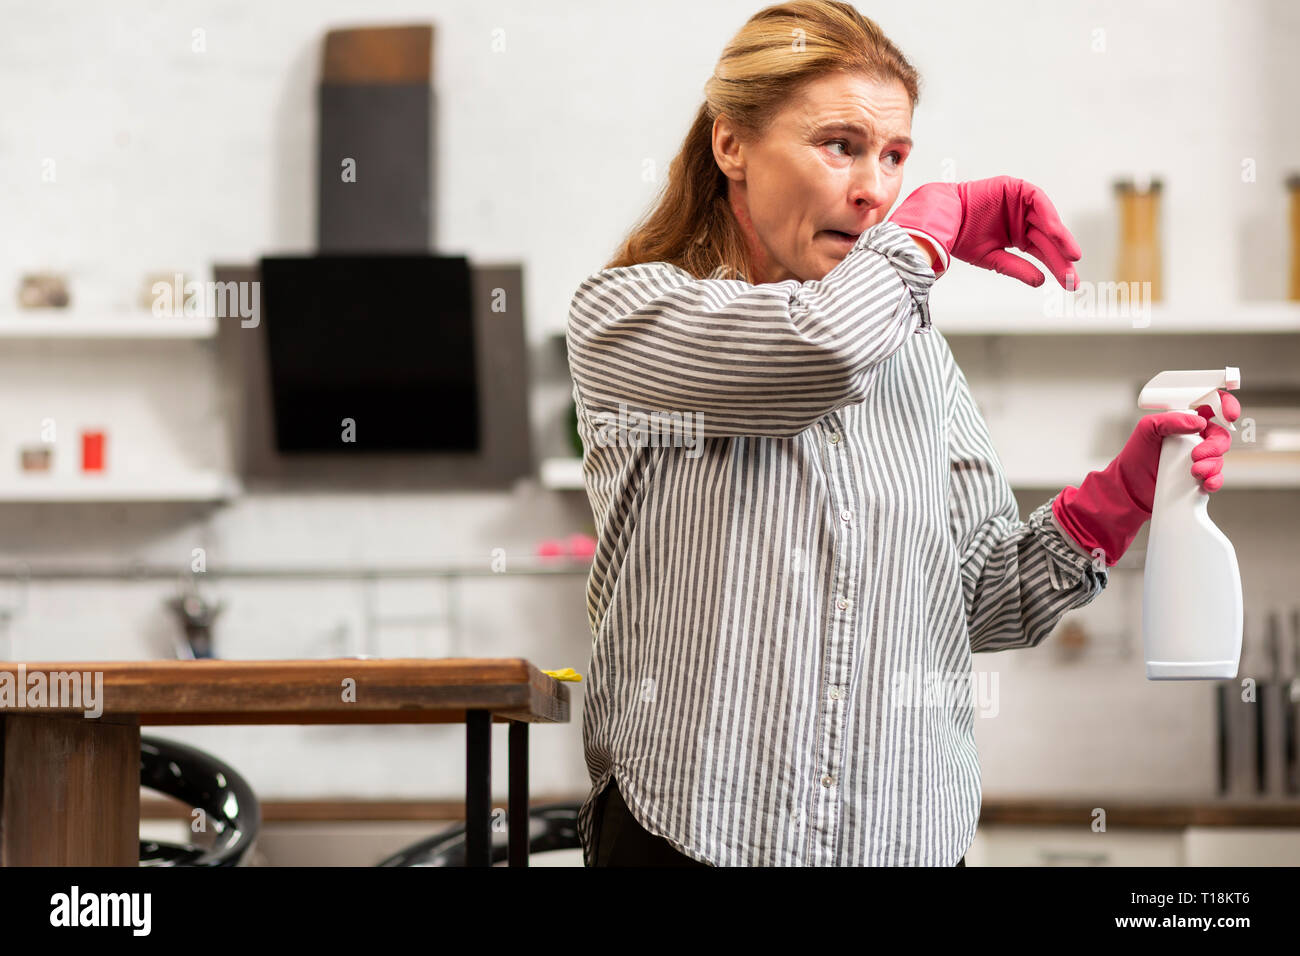 Housewife wearing shirt and gloves cleaning her flat and sneezing Stock Photo